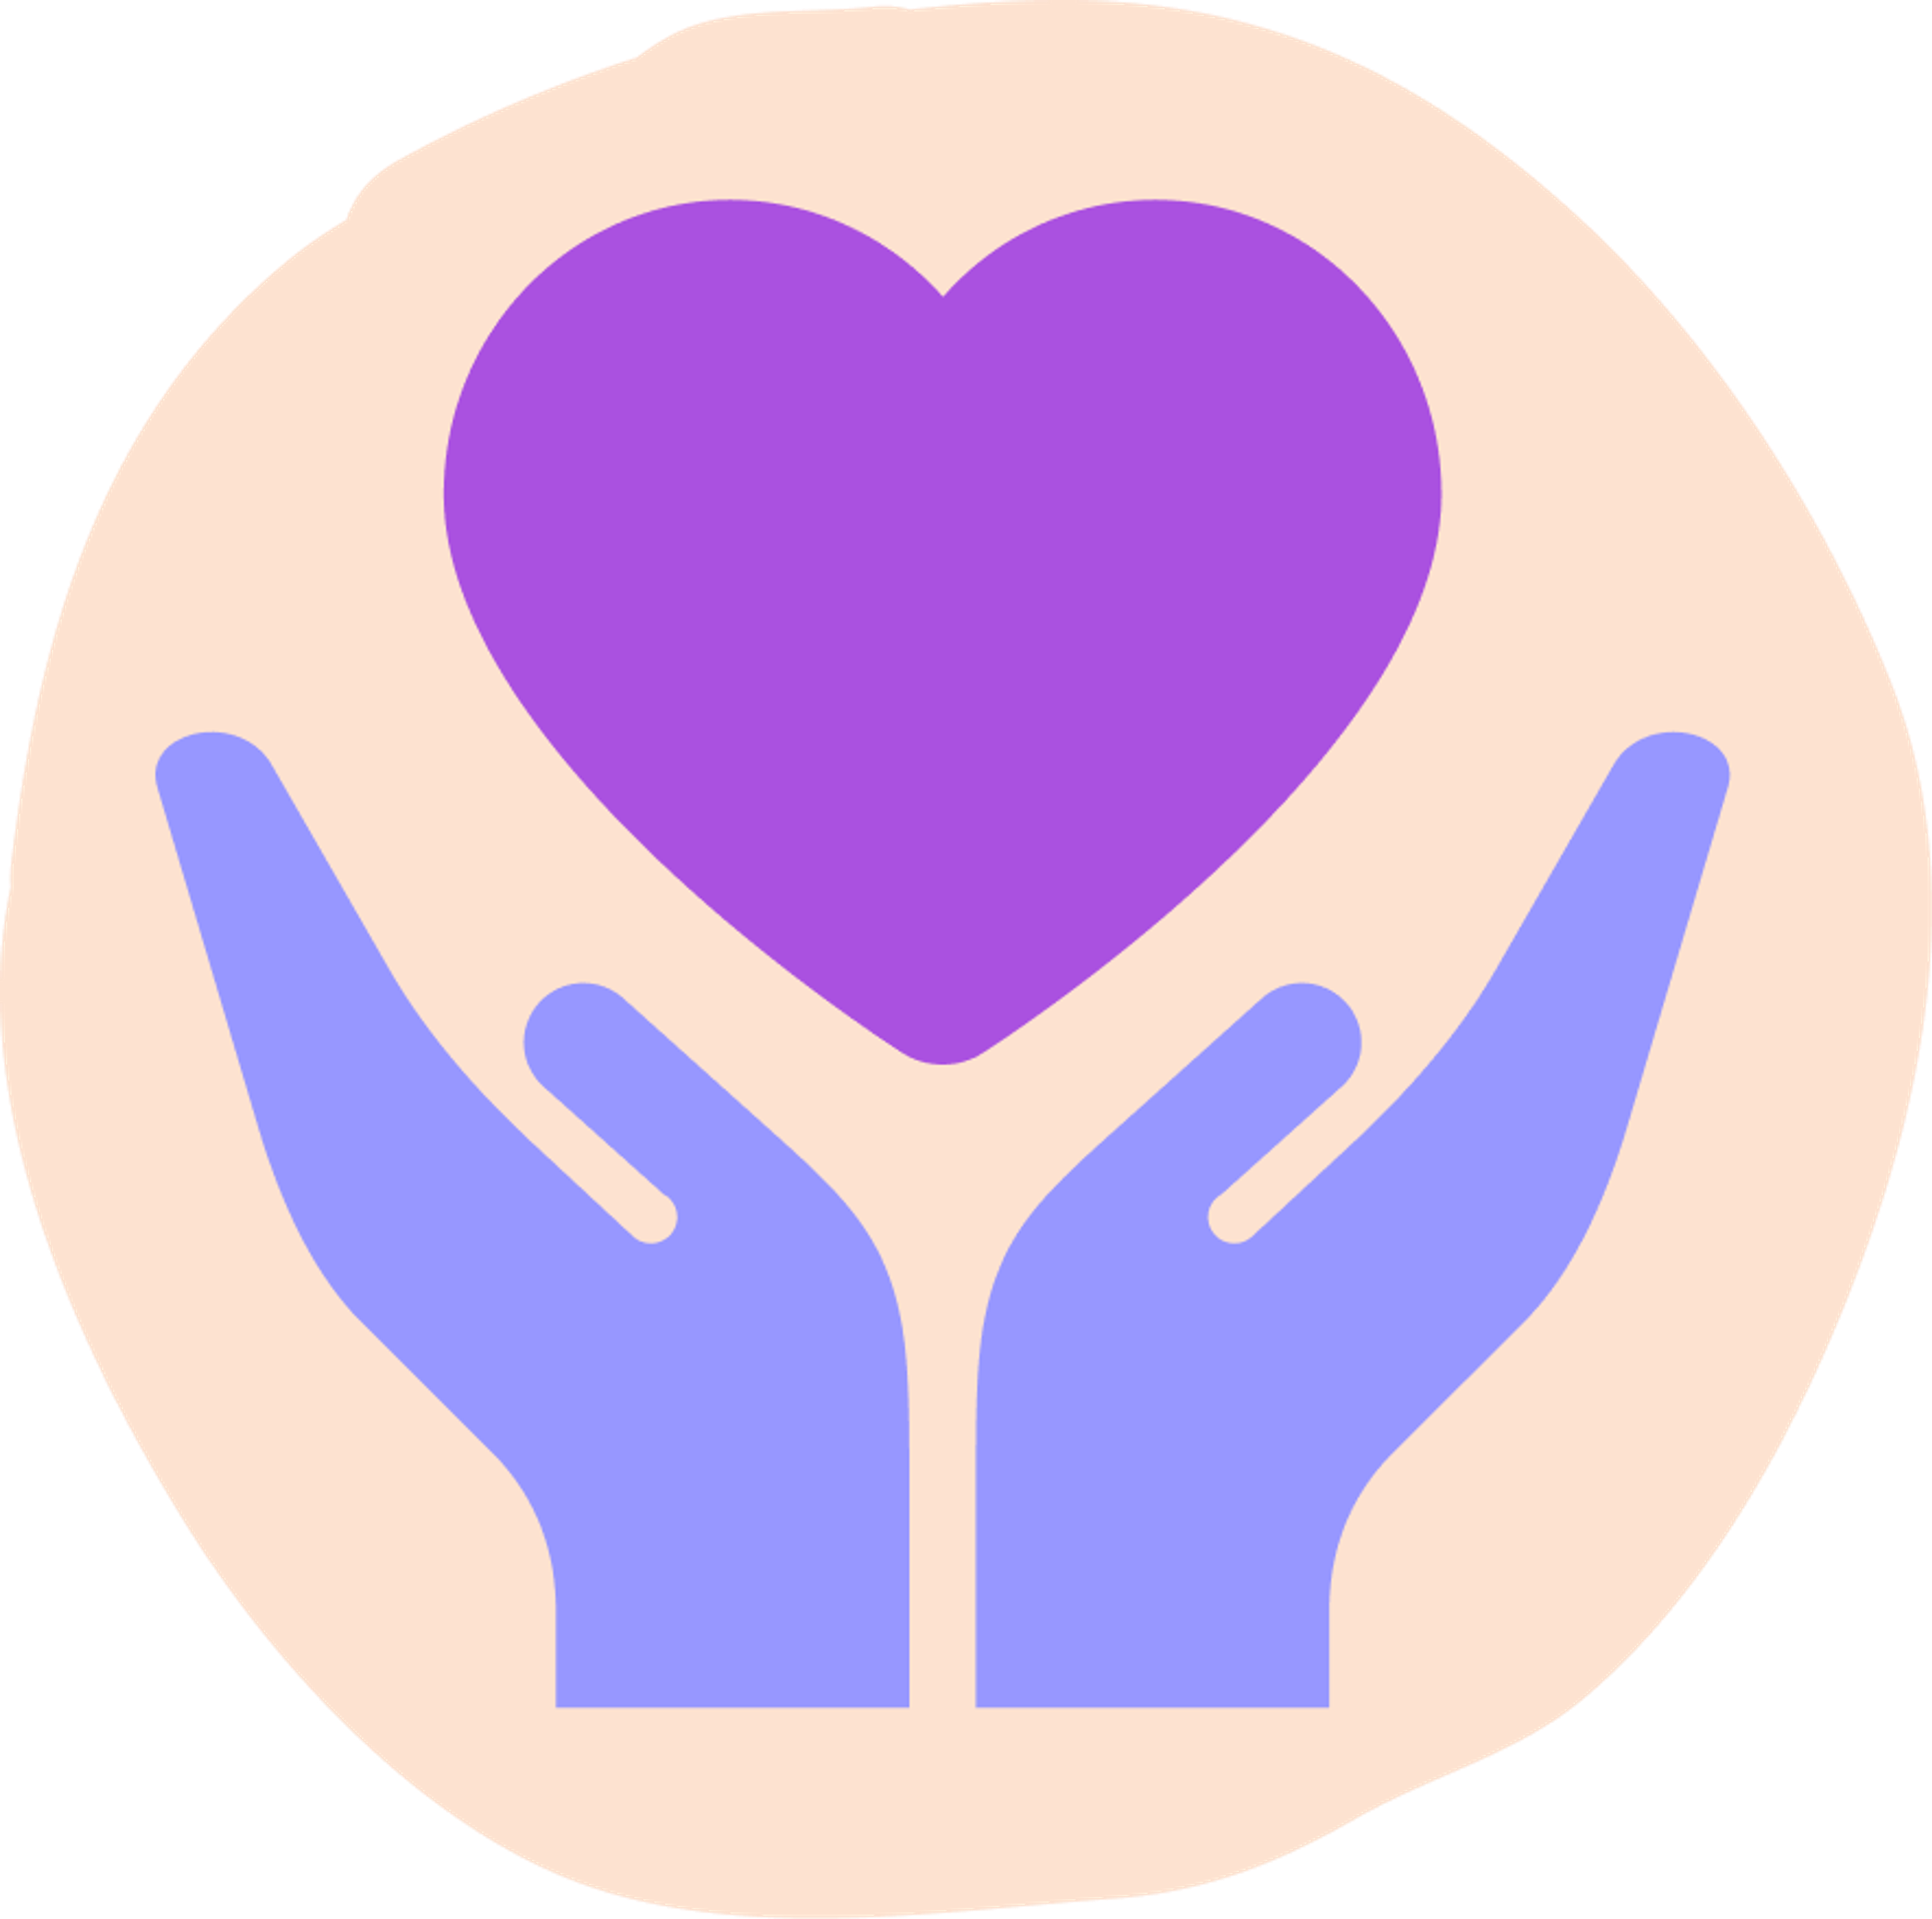 icon of a heart and hands